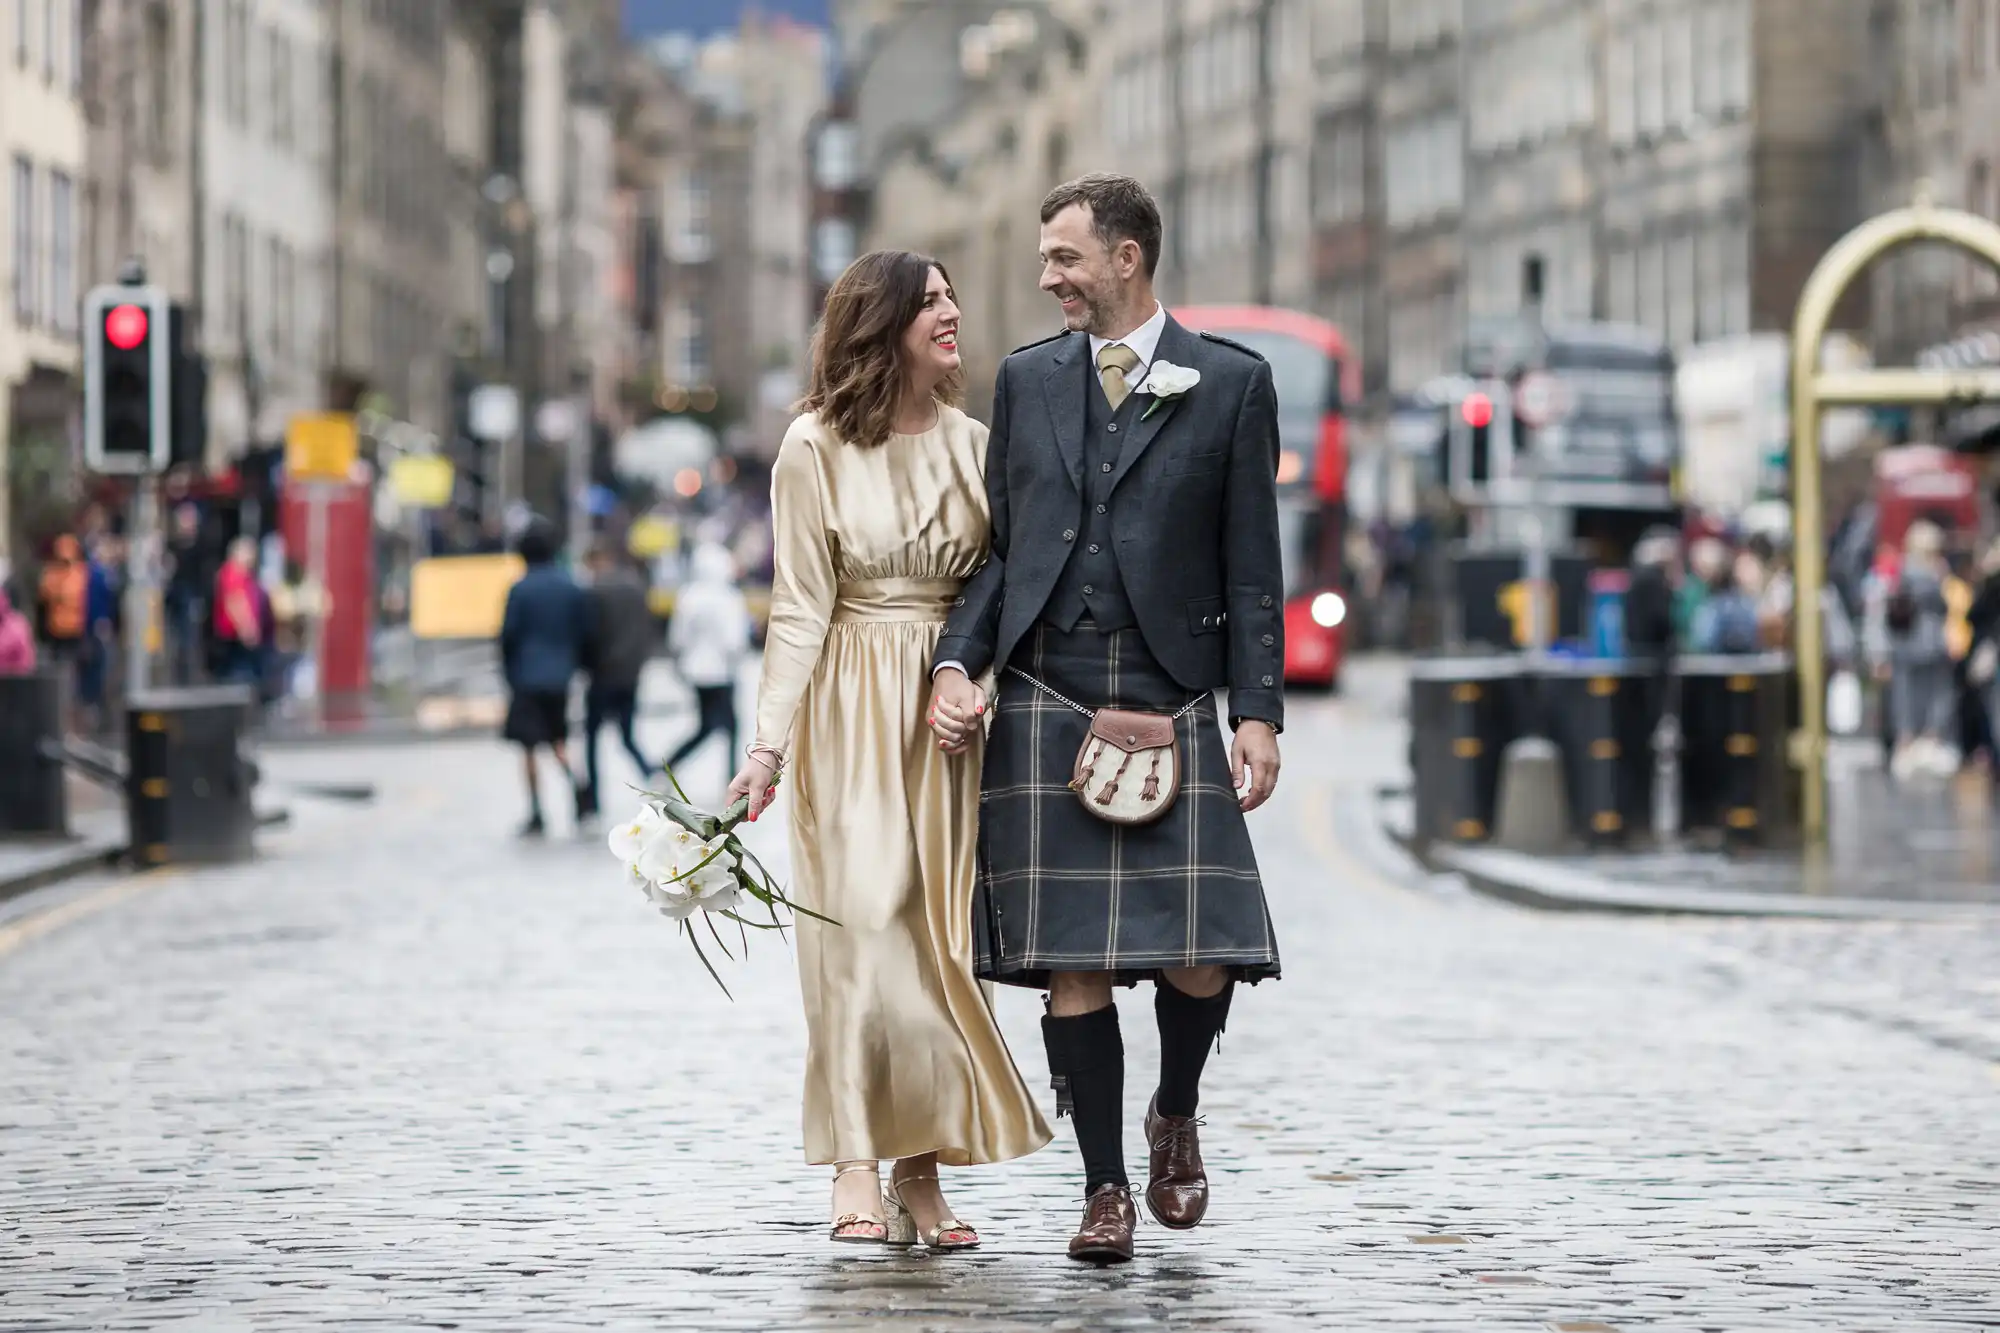 A newlywed couple dressed in formal attire, with the man wearing a kilt, walk hand in hand on a cobblestone street in a city. The woman holds a bouquet of white flowers.